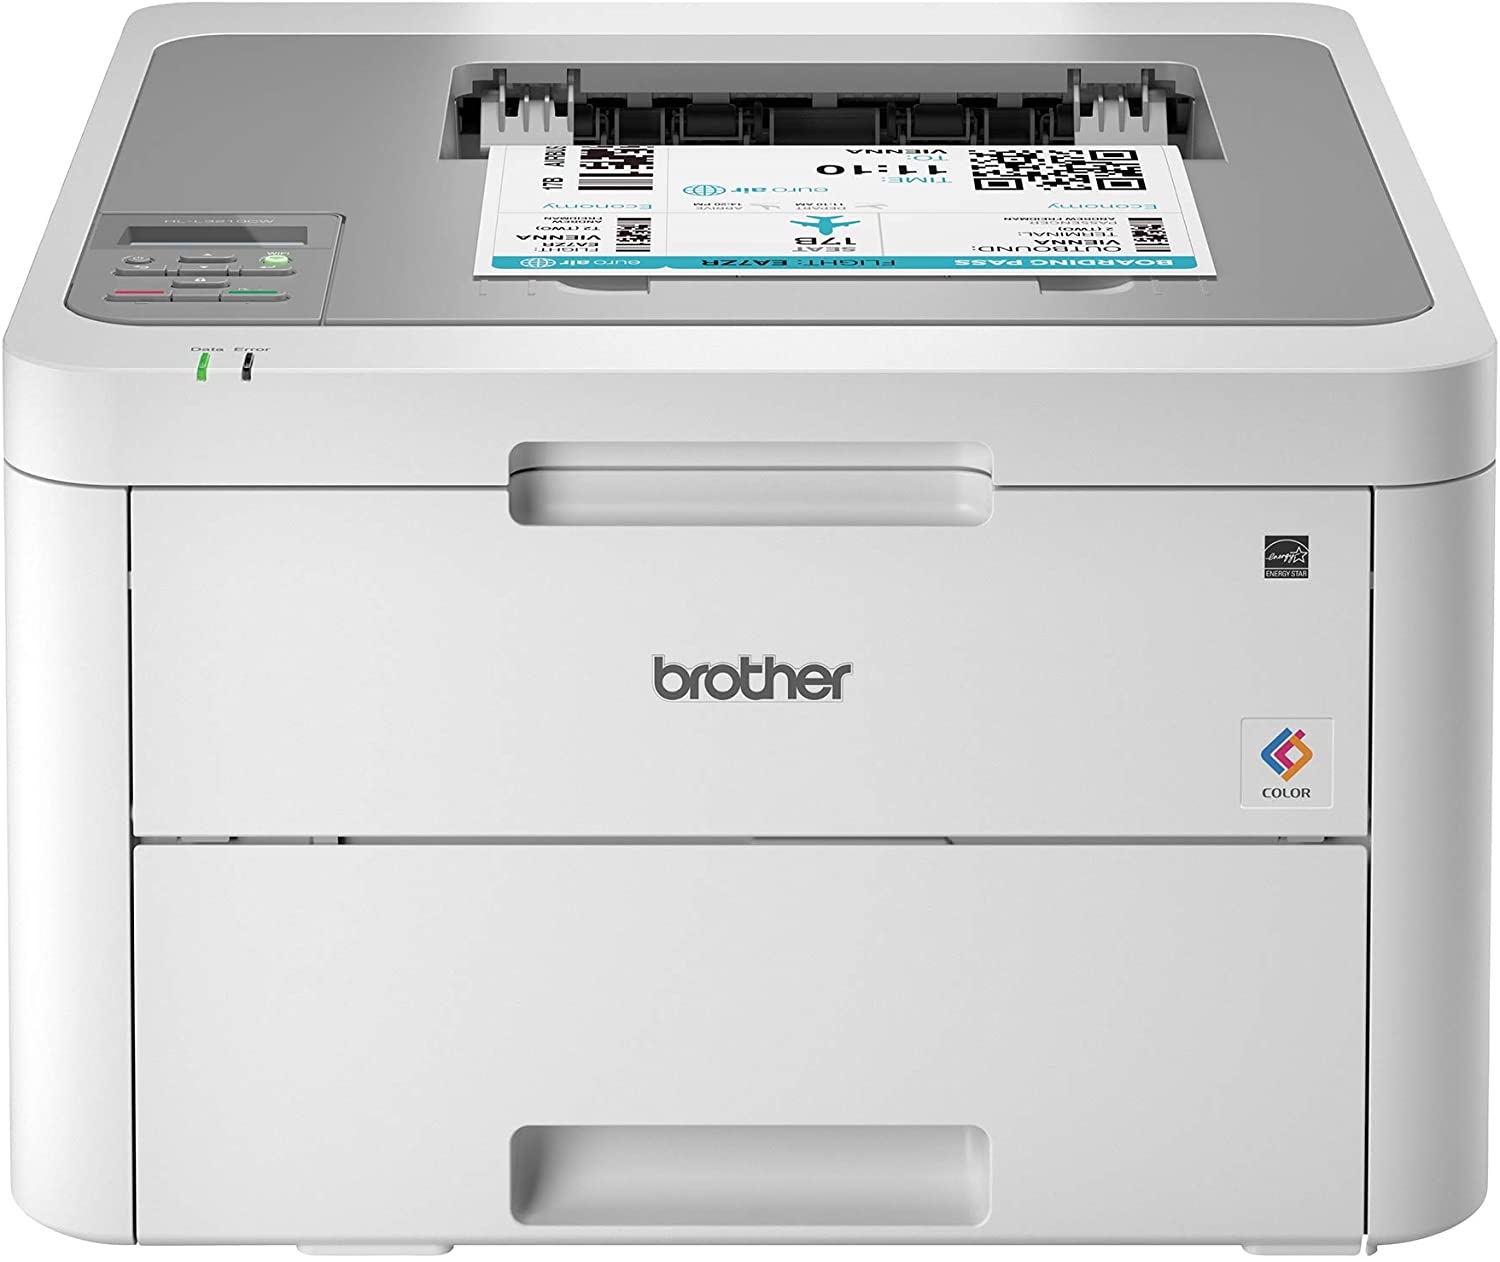 Brother Factory Refurbished HLL3290CDW Color Laser Multifunction Printer with Duplex and Wireless $254.99 or Brother HL-L3210CW Color Printer for $174.99